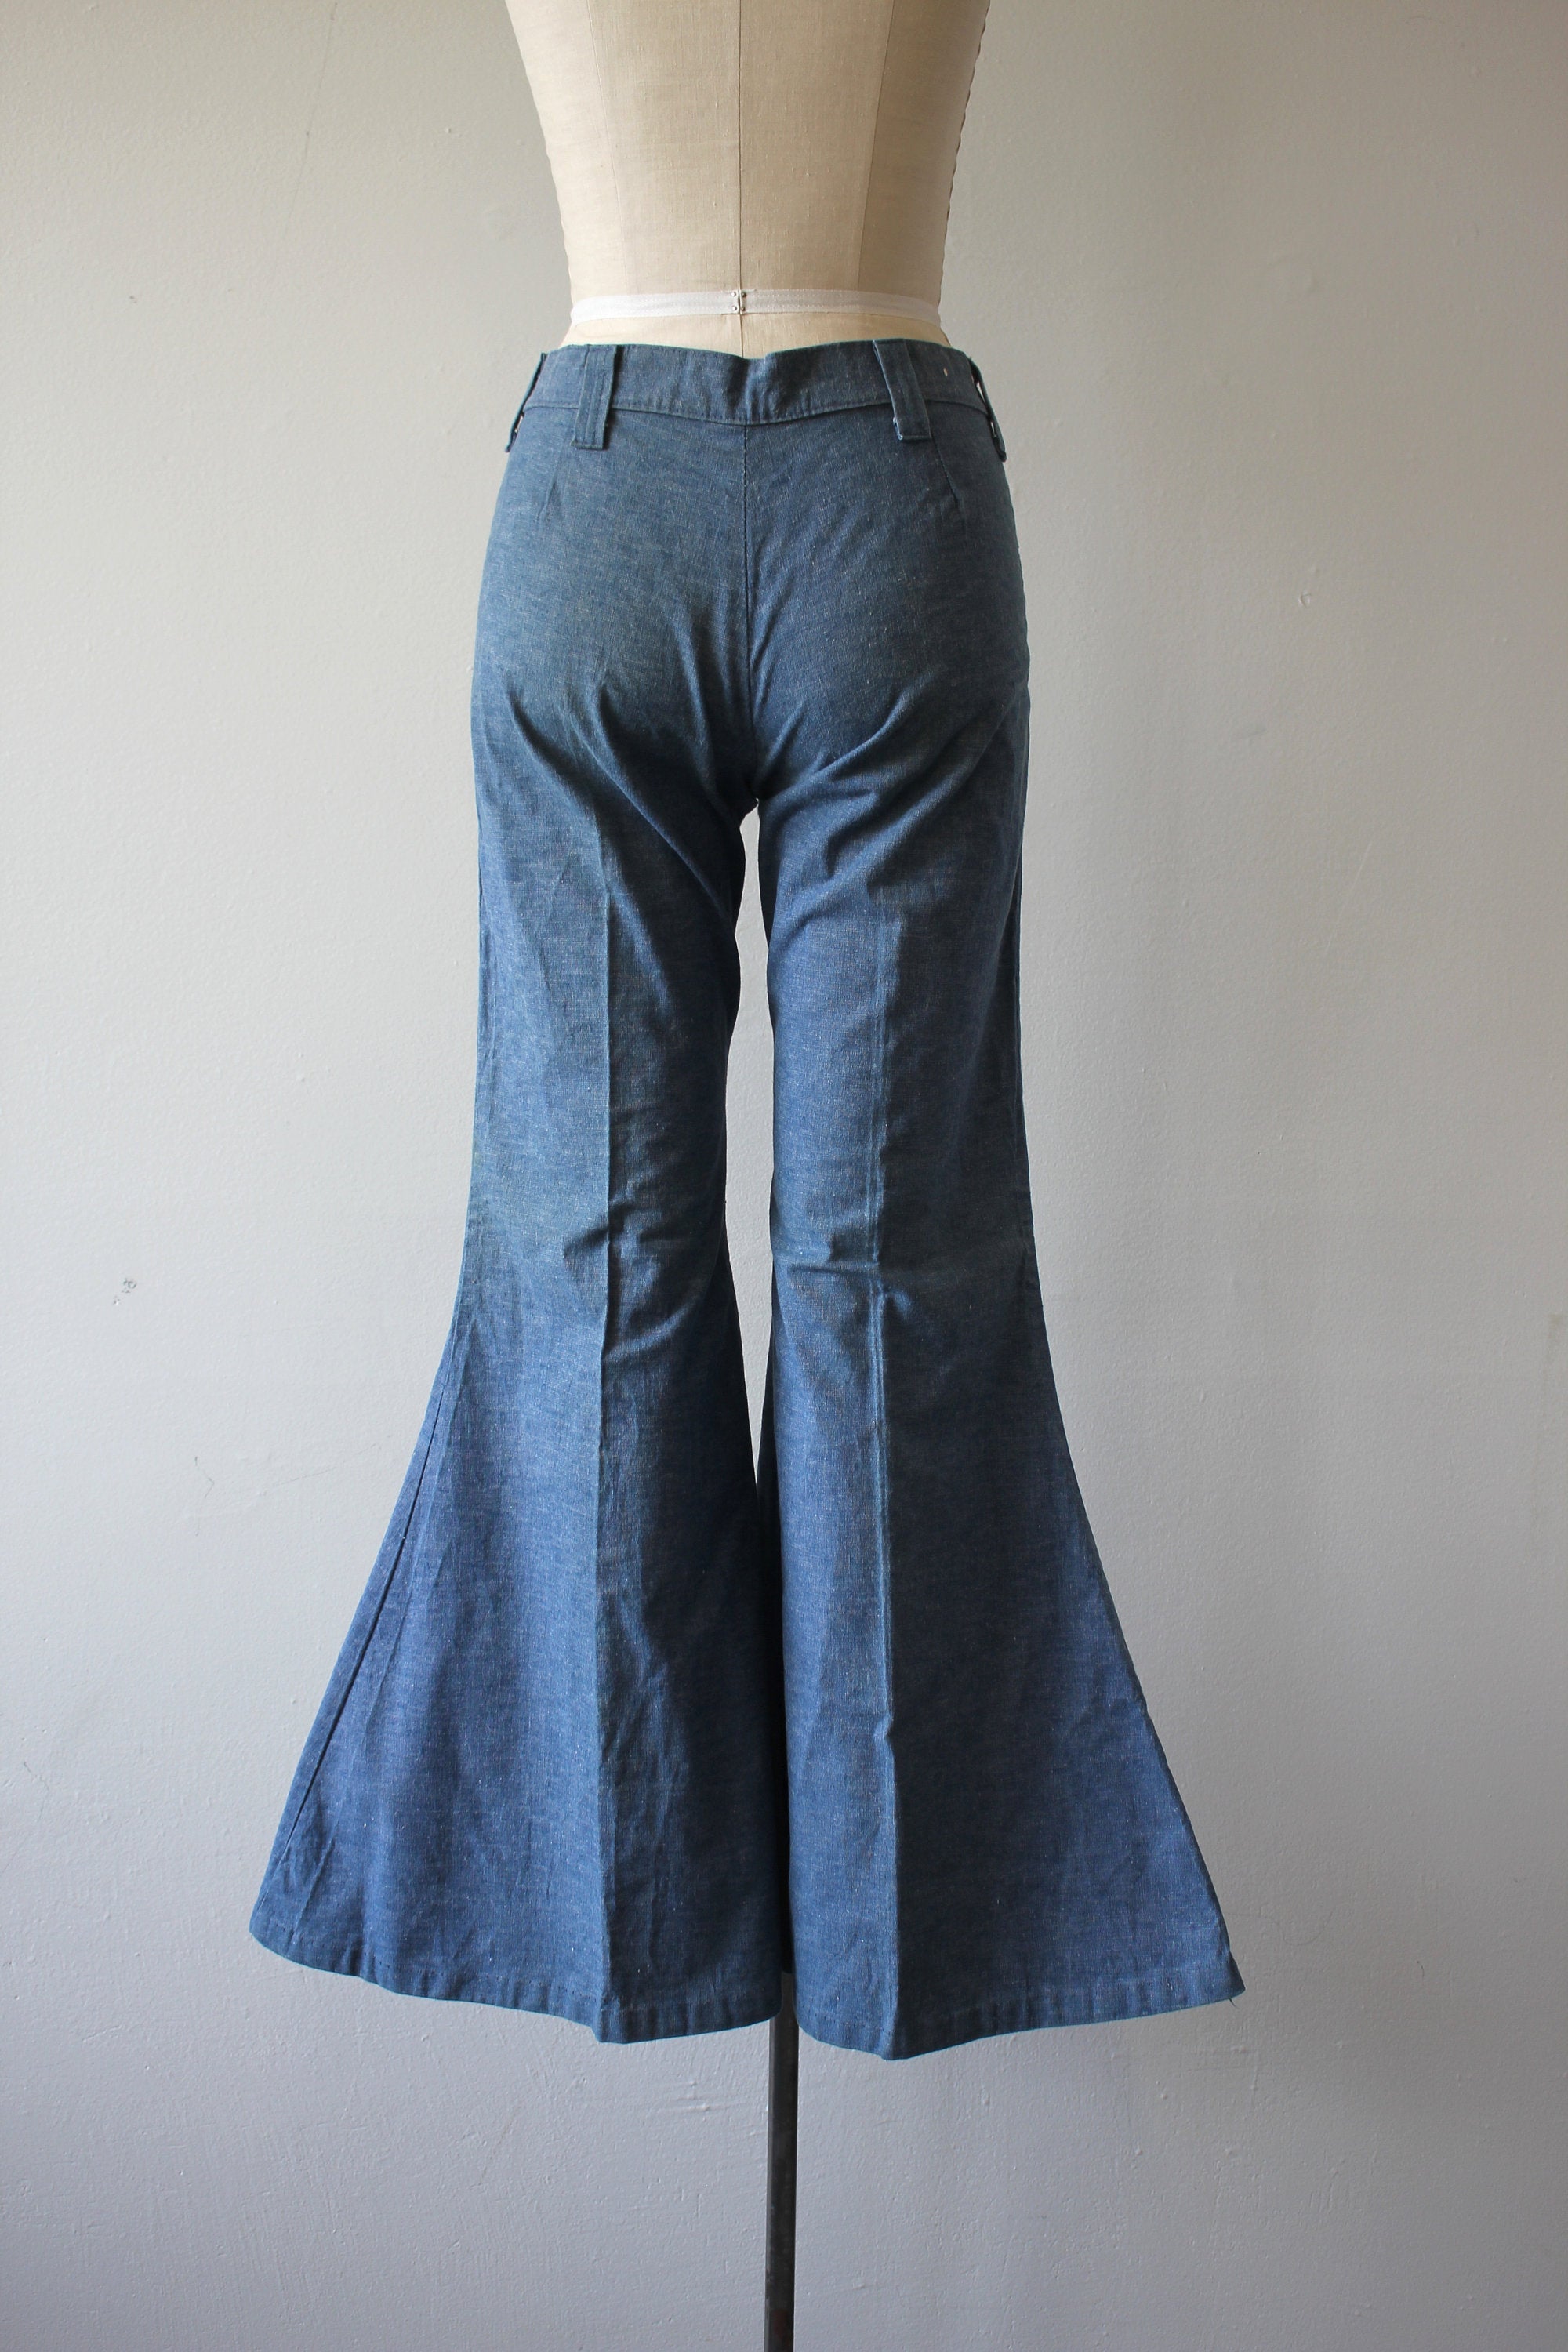 Anvil Brand Vintage 60s Patched Hippie Jeans Bell Bottoms Flares